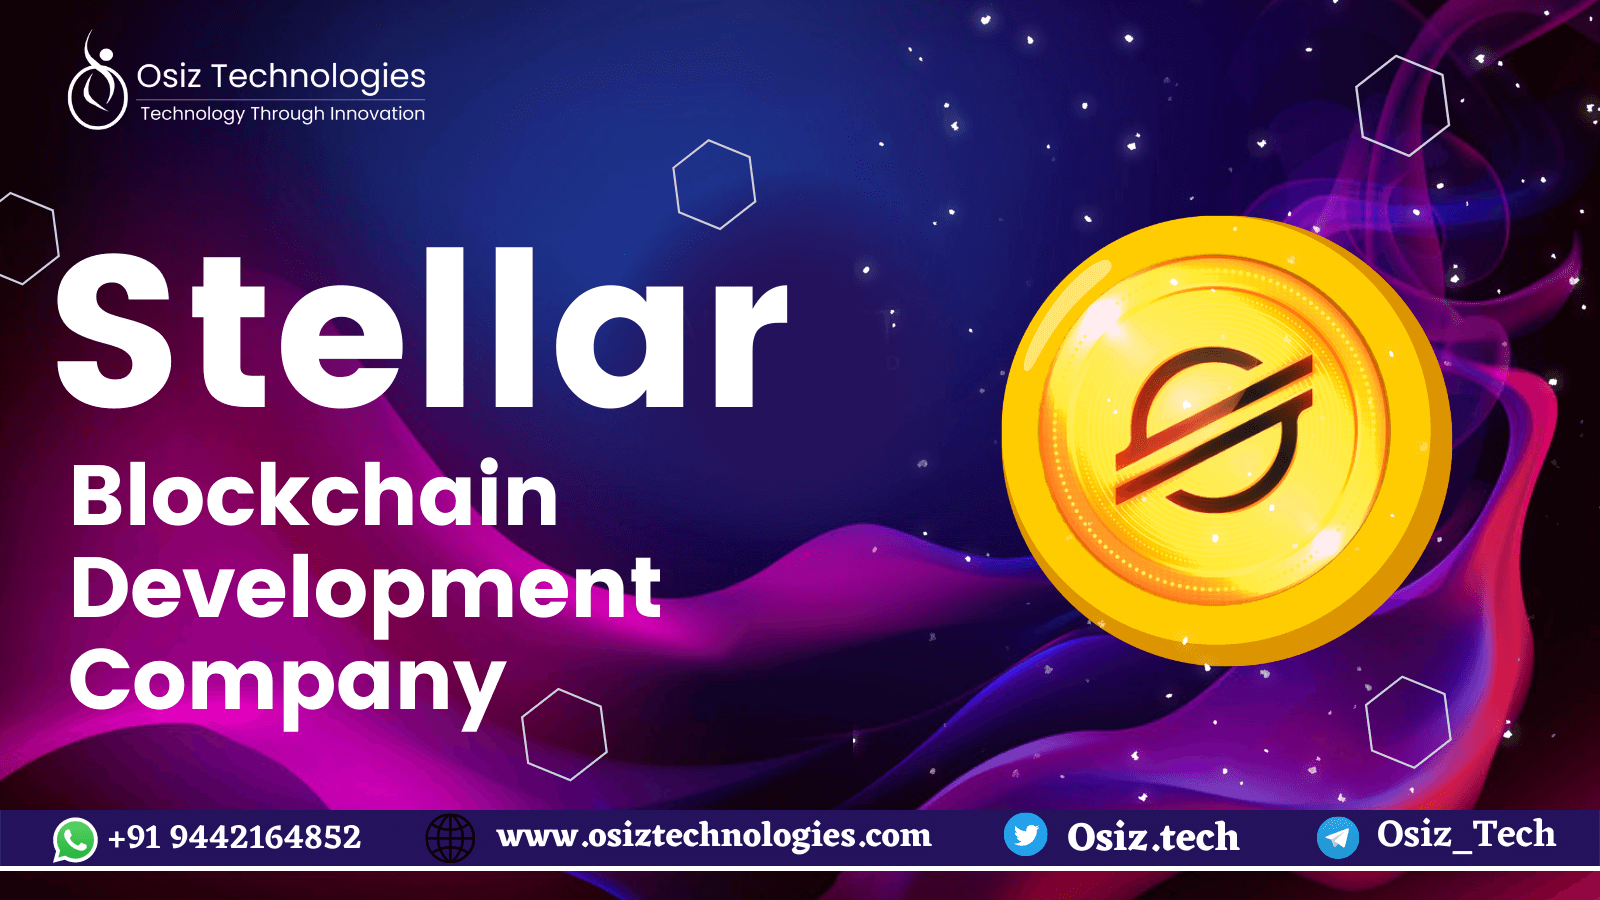 Lead The Crypto Space With A Stalwart Stellar Blockchain Development Company